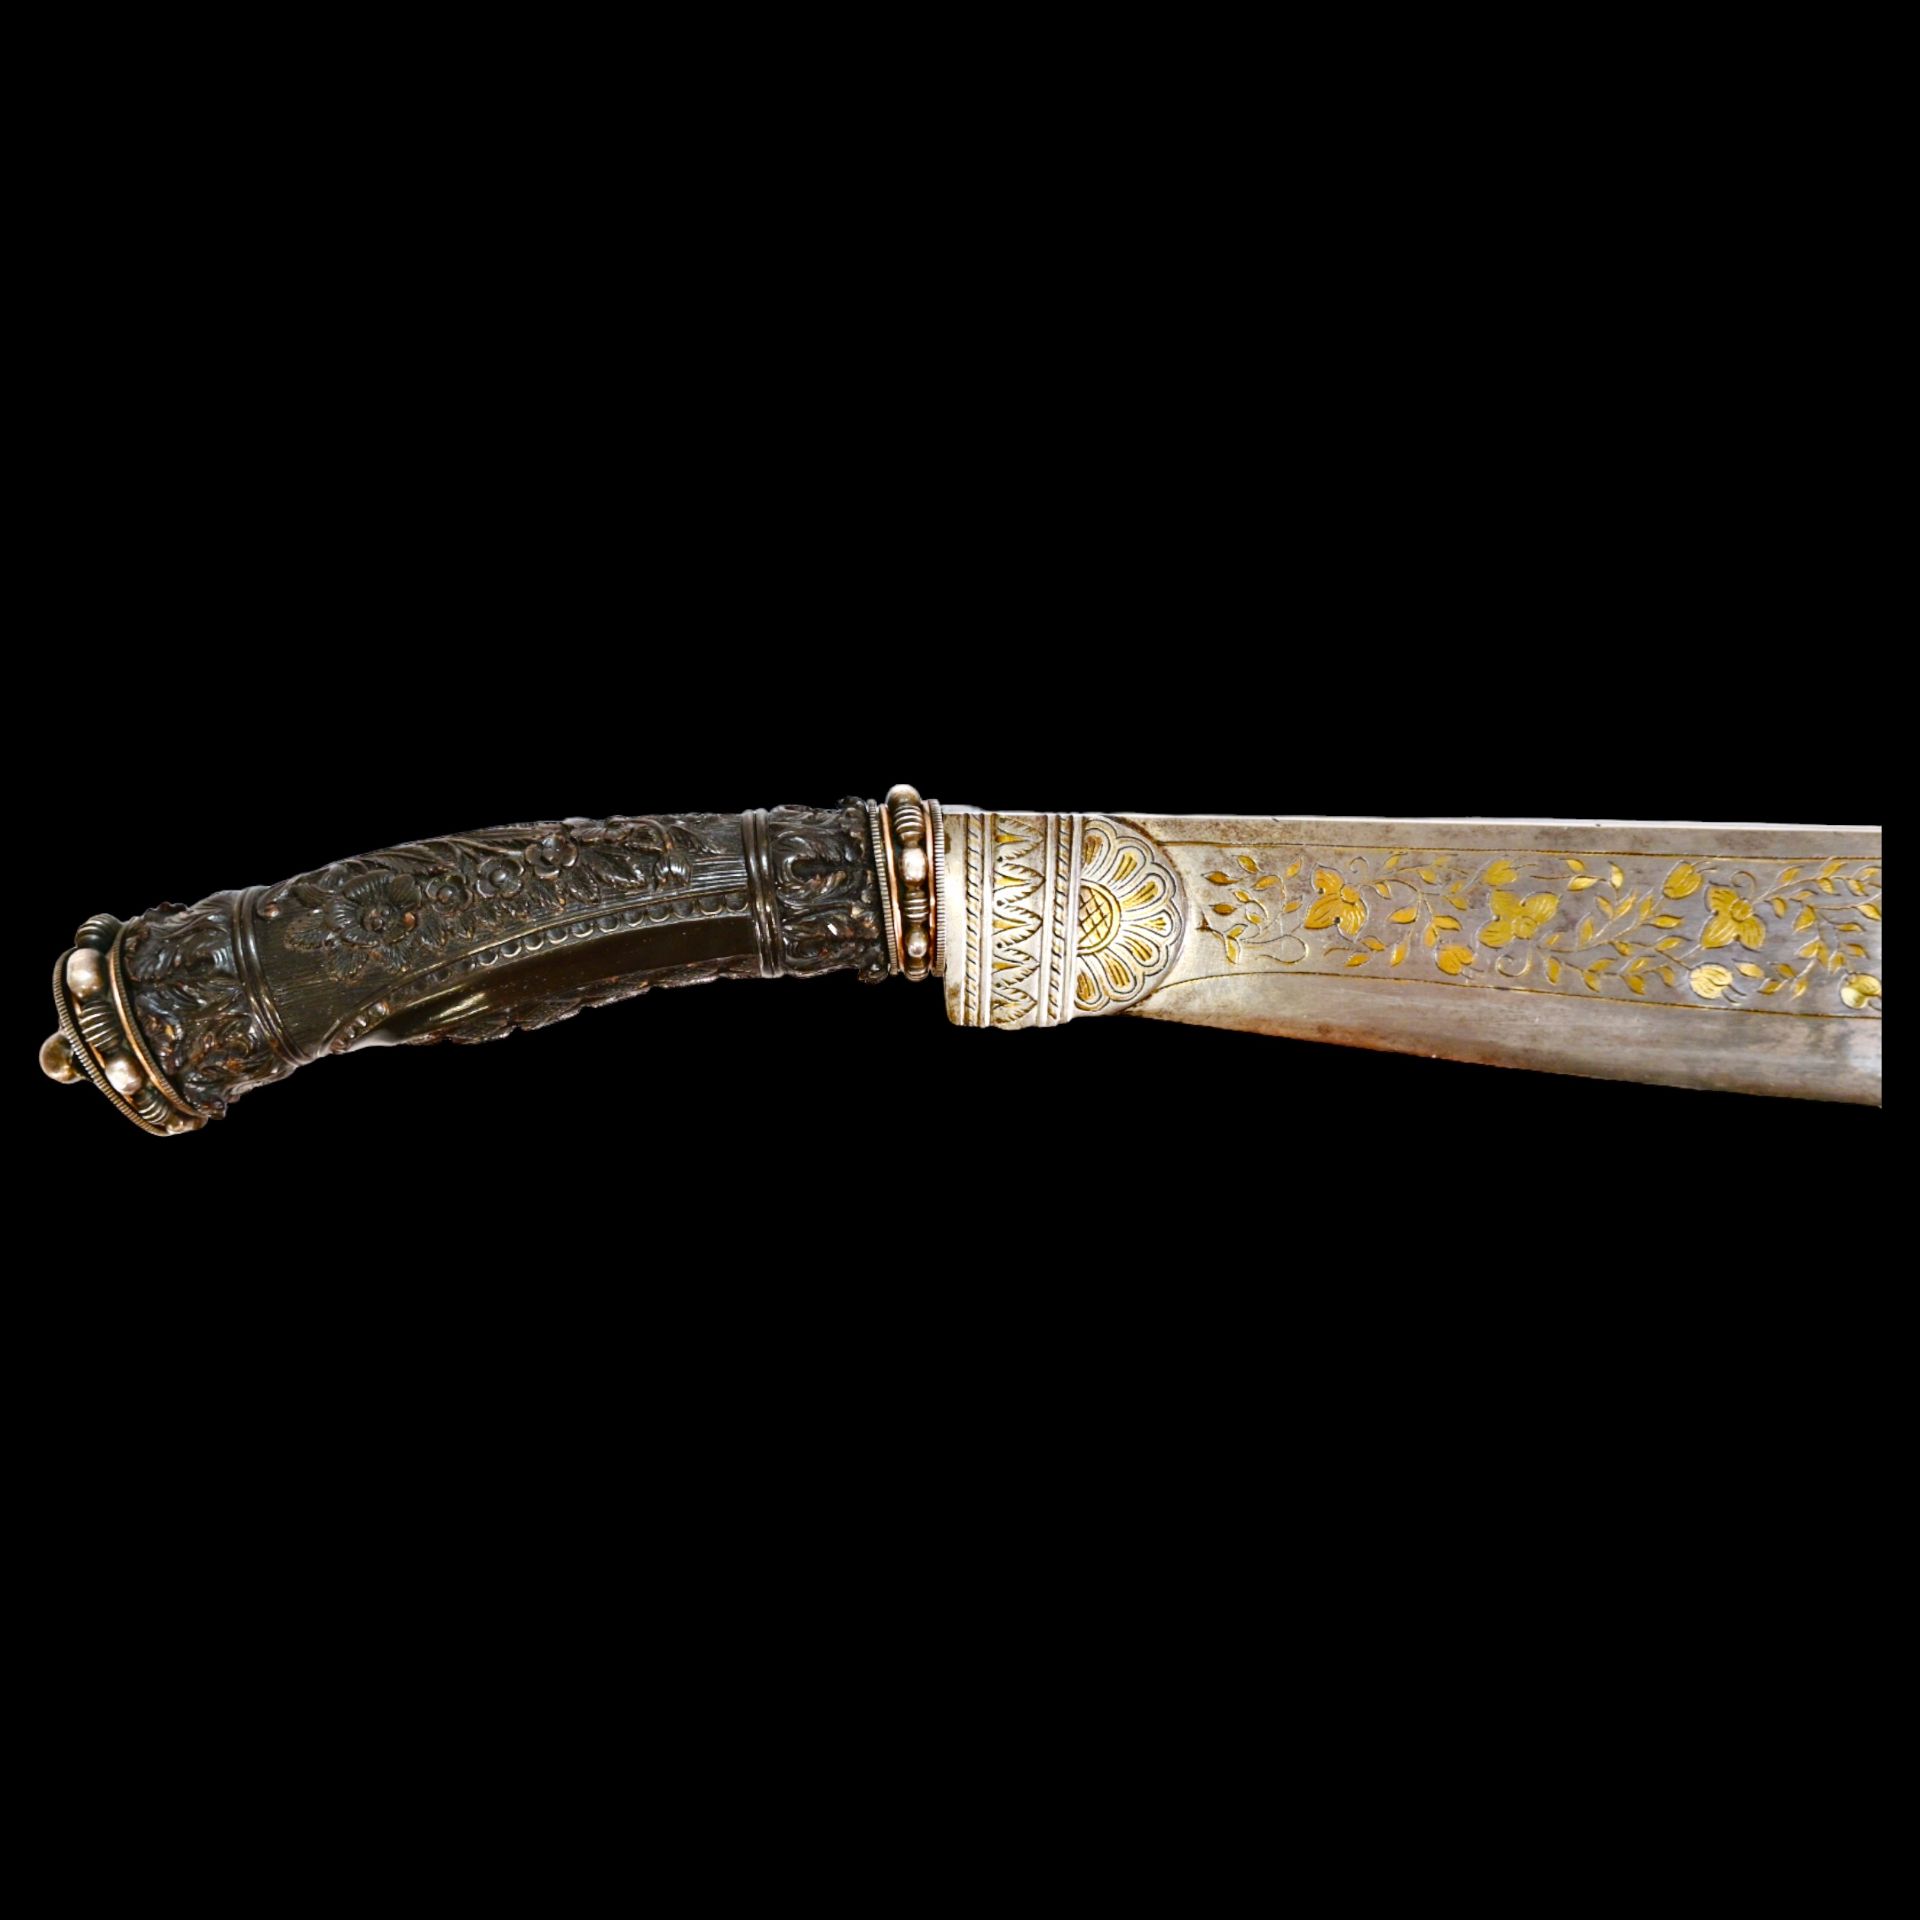 Magnificent, richly decorated knife, Indonesia, first half of the 20th century. - Image 14 of 33